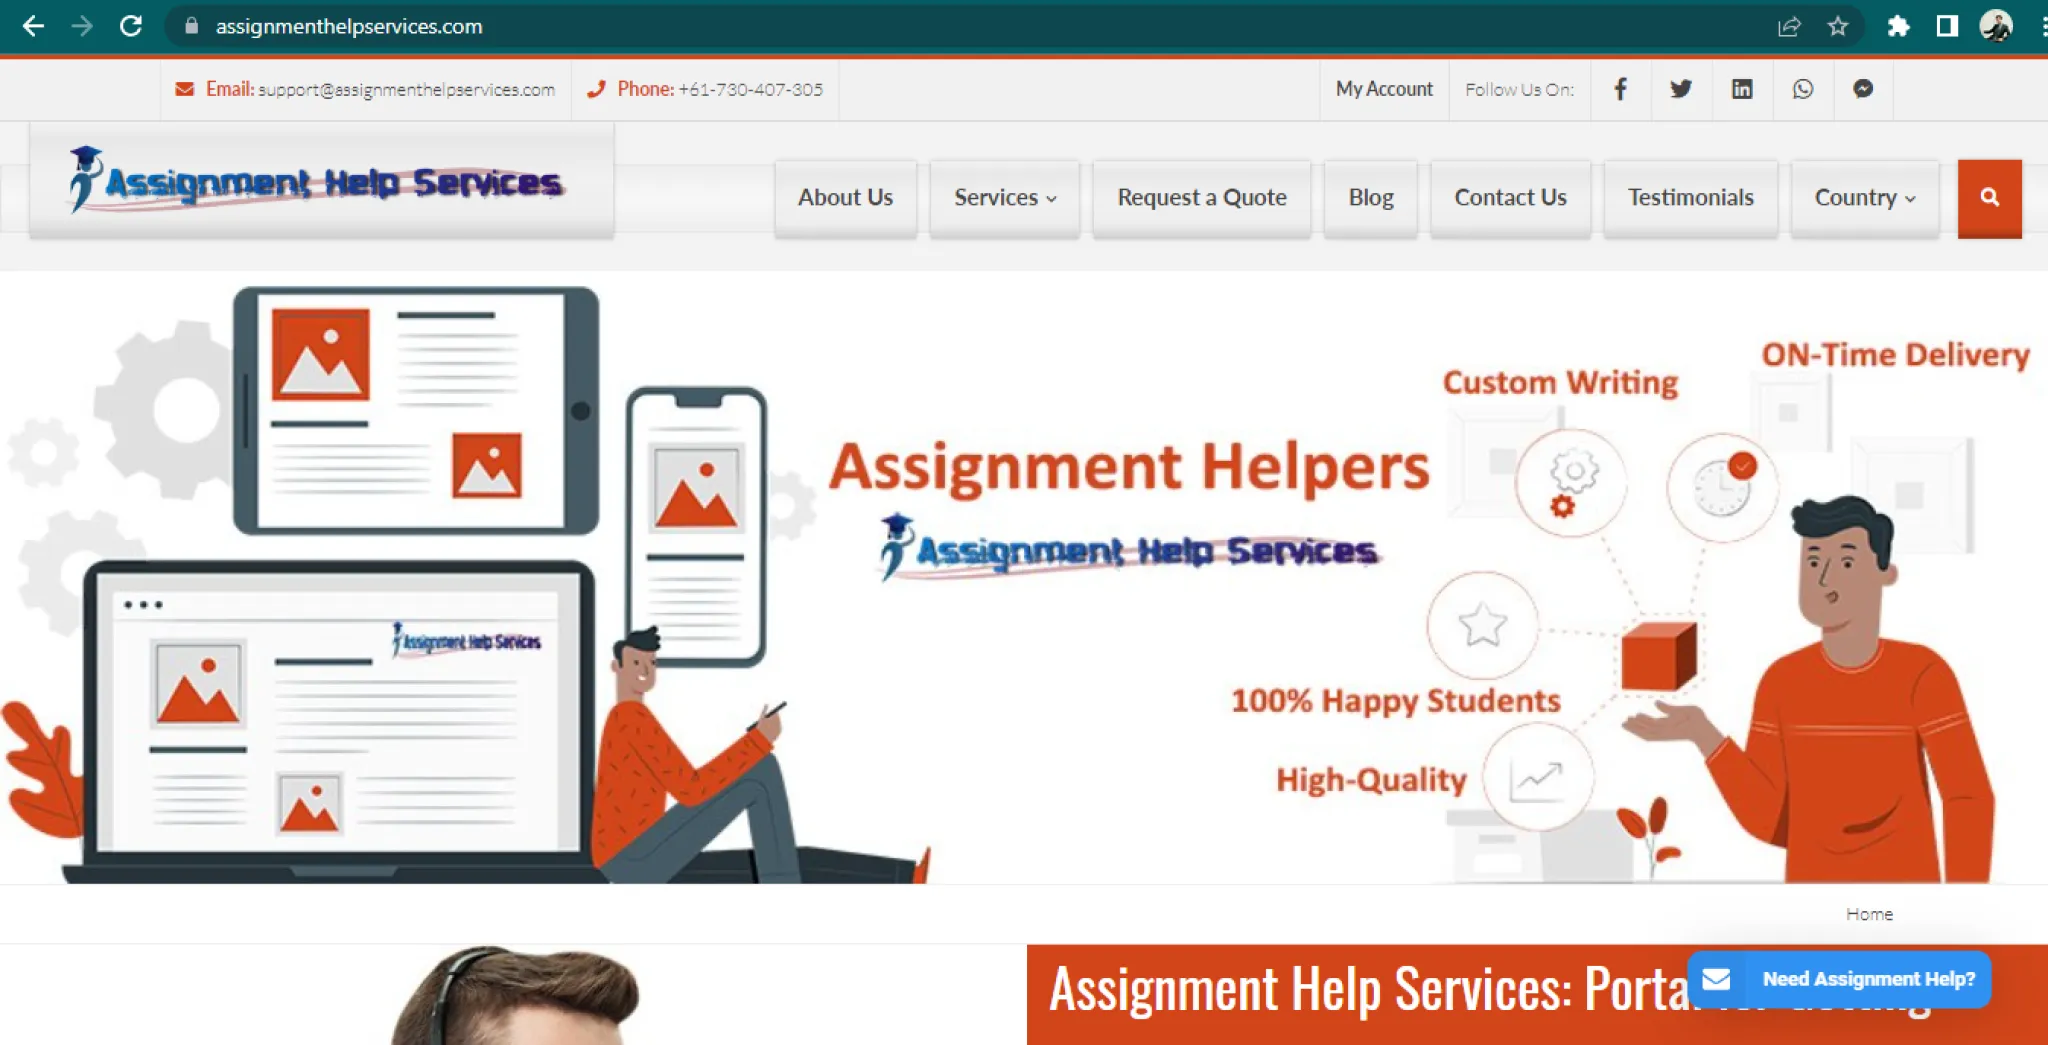 Assignment Help Services Review